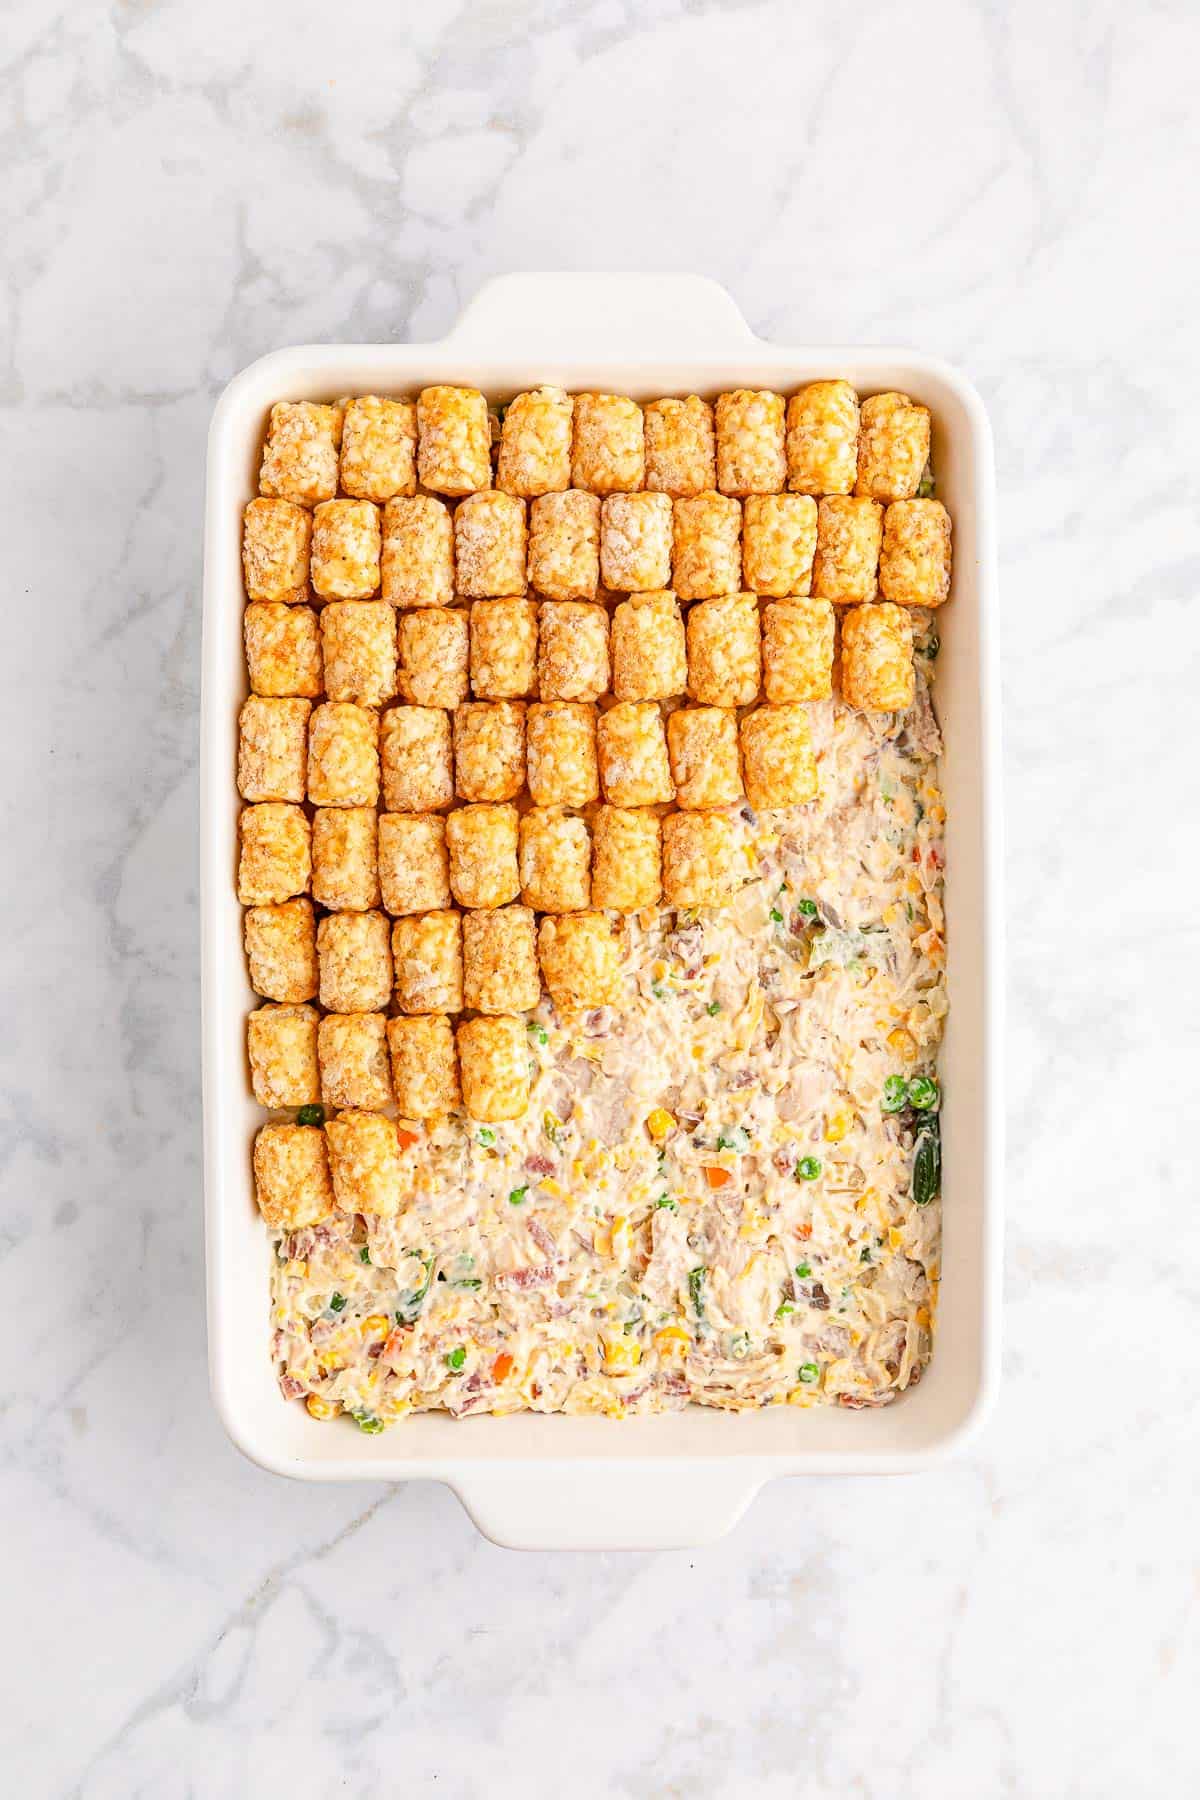 Topping chicken mixture with tater tots in a white baking dish.